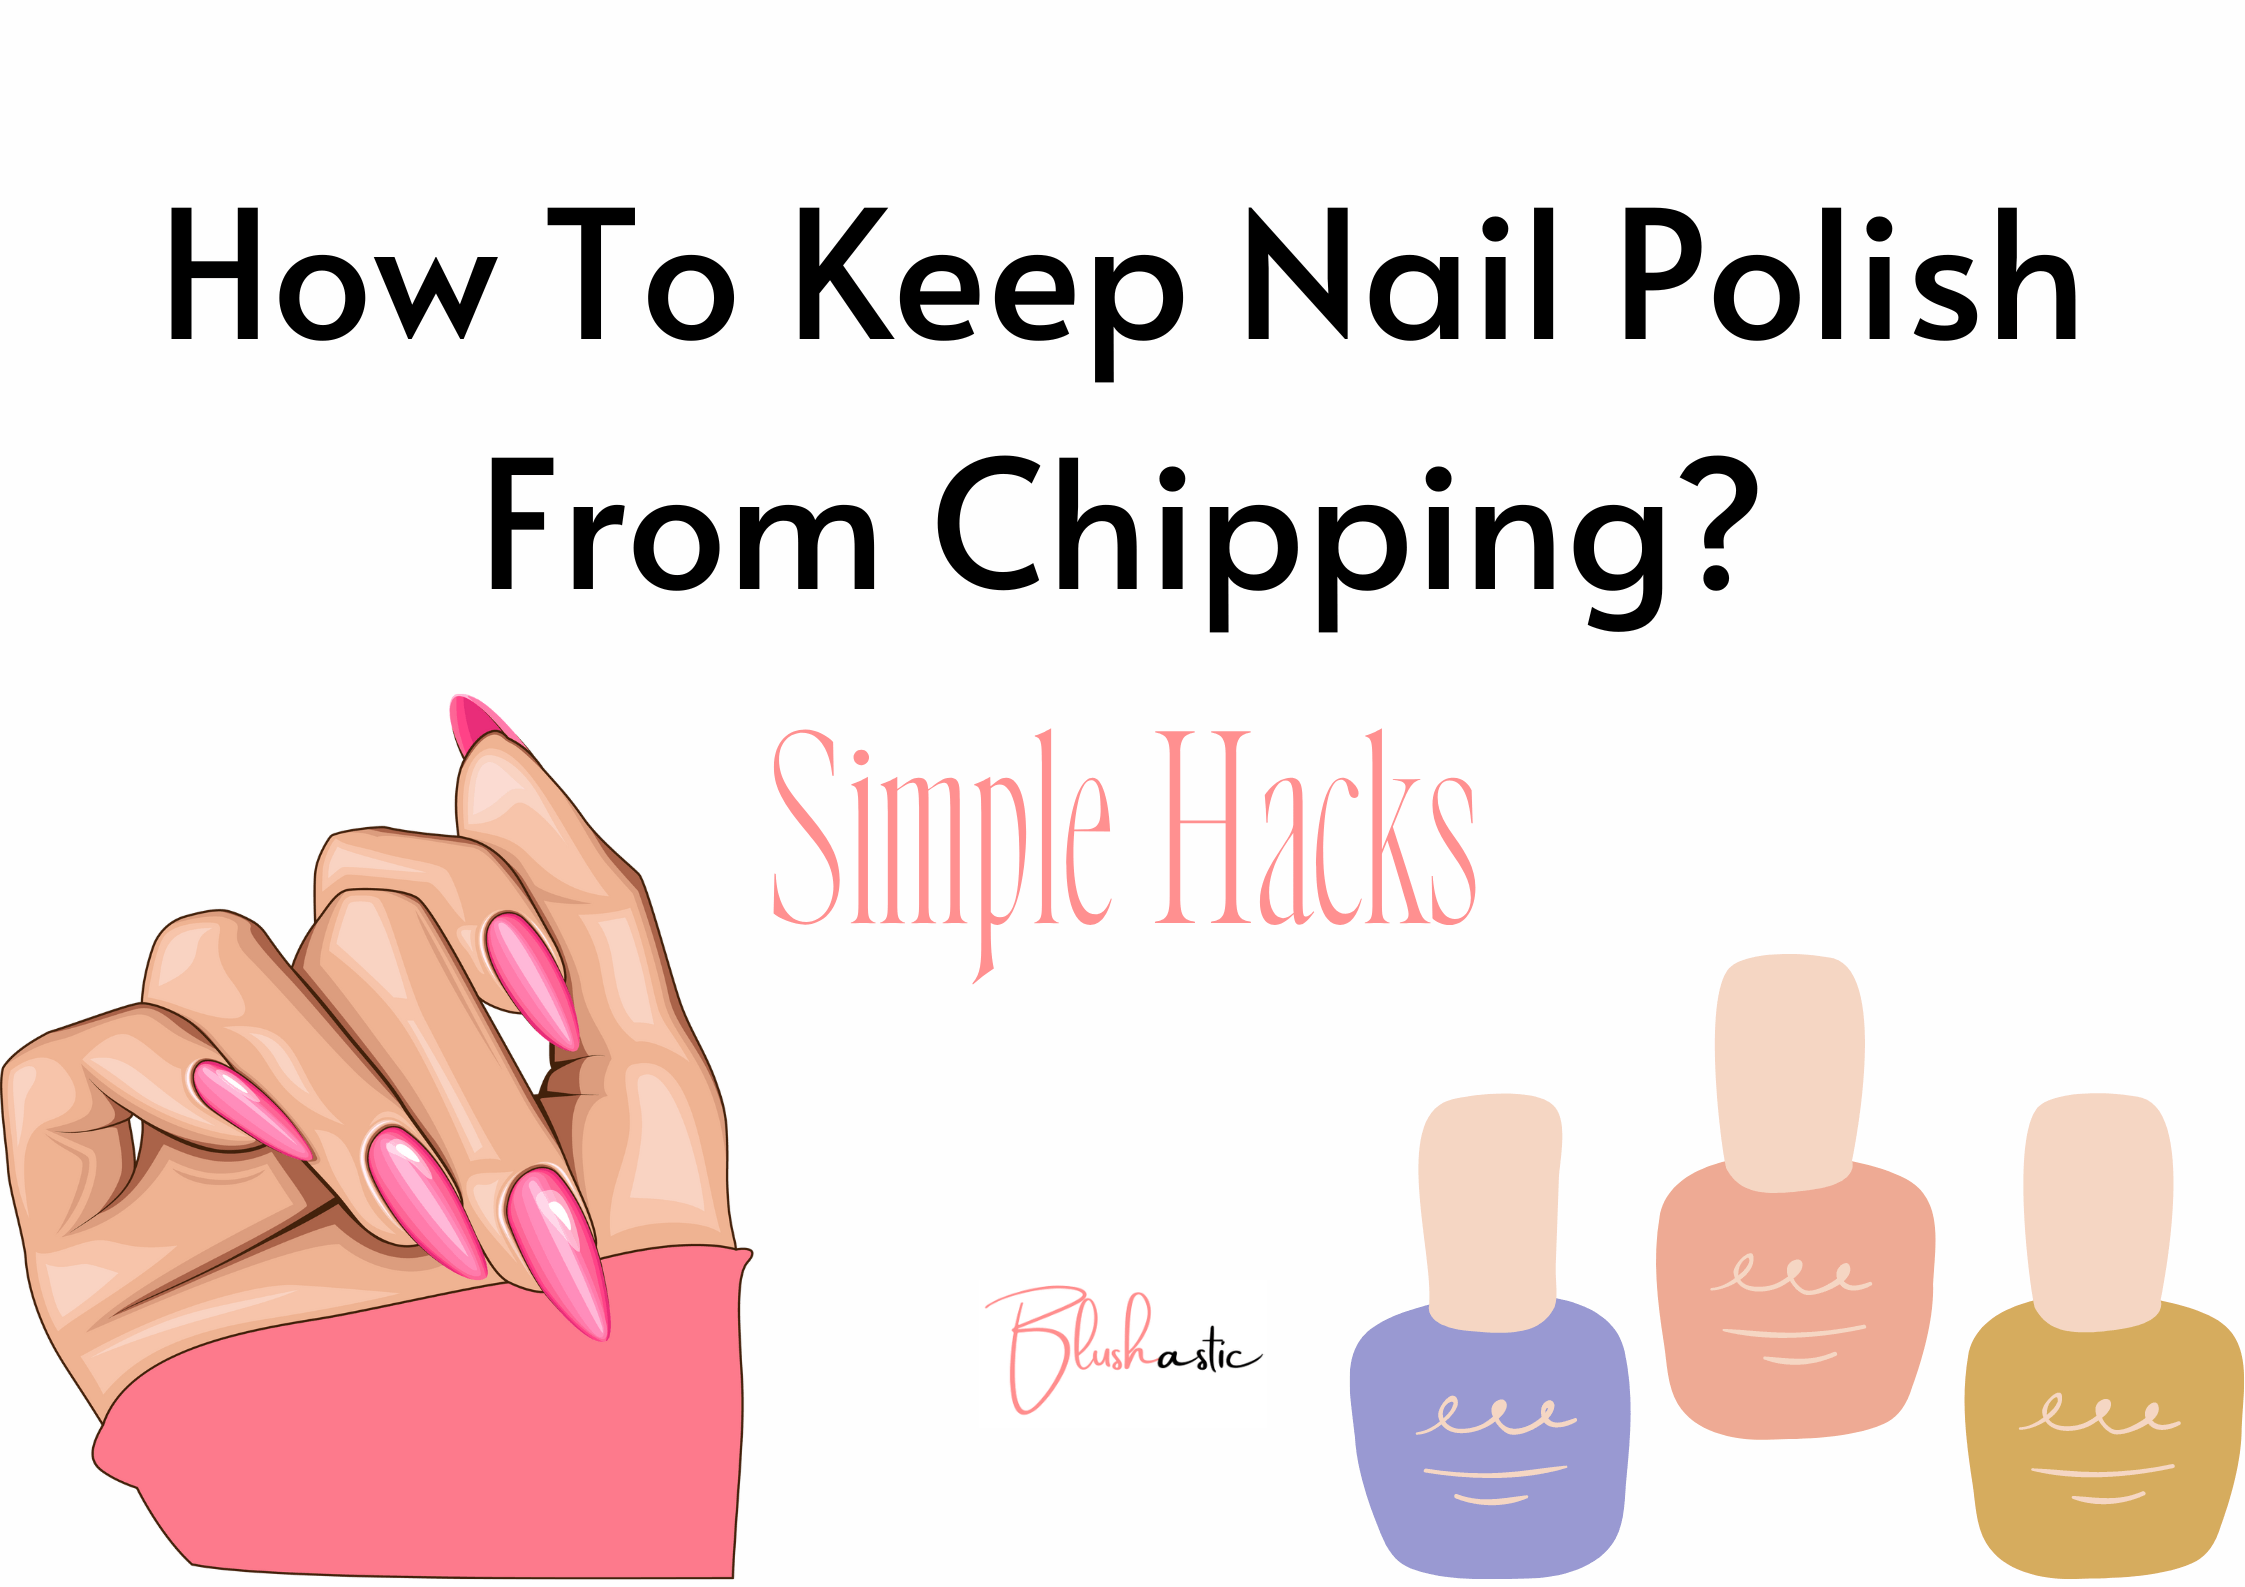 How To Keep Nail Polish From Chipping? Expert Tips - Blushastic